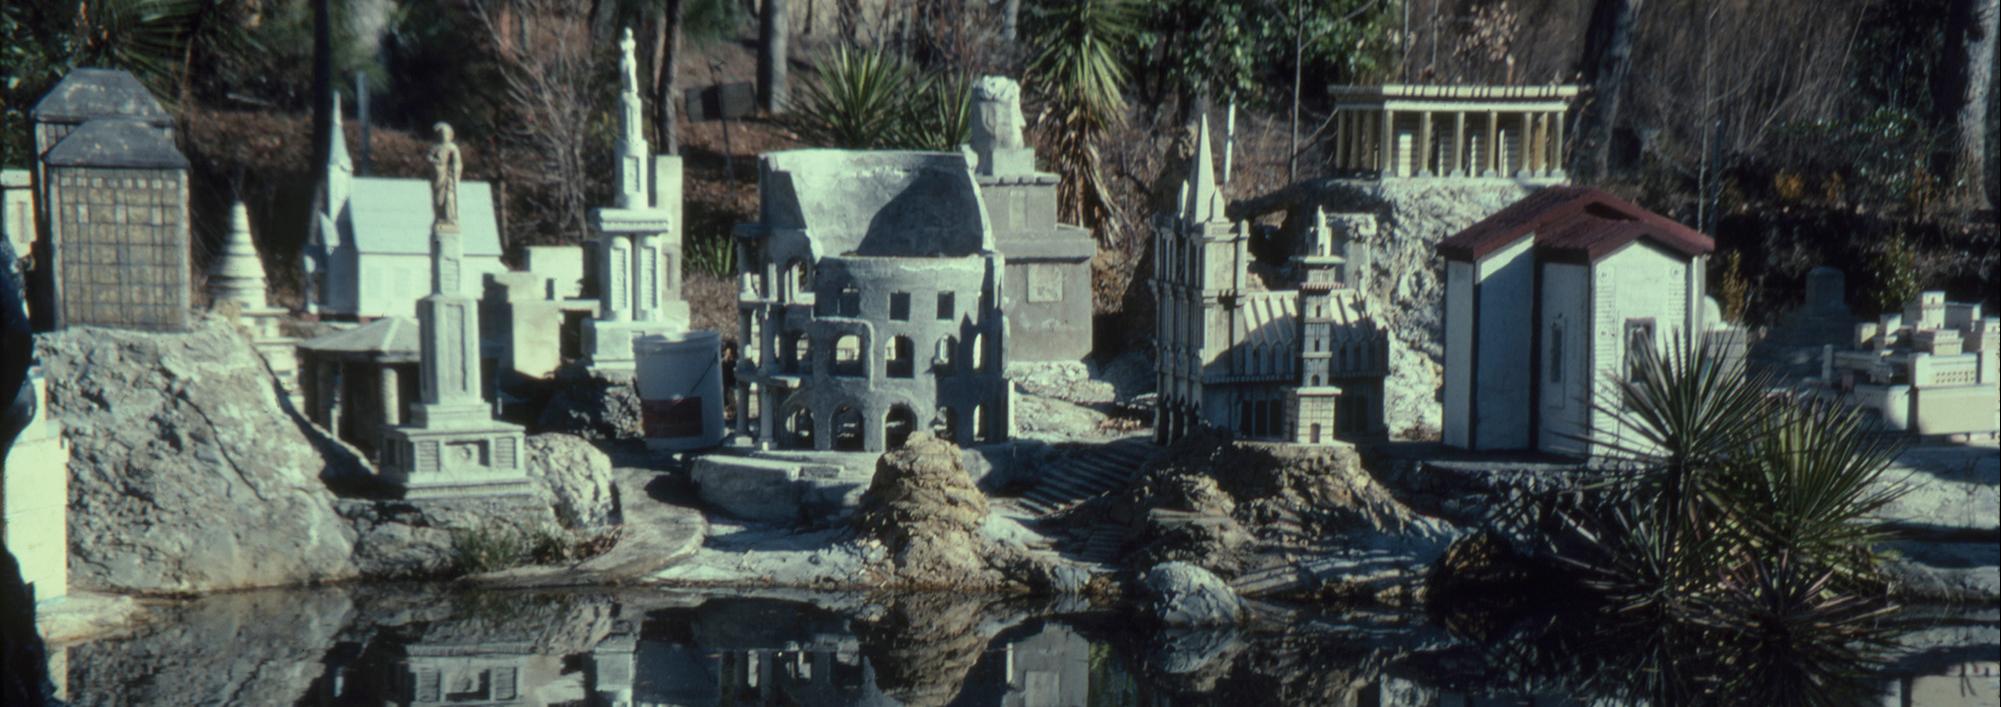 Collection of large building replicas of classical architecture made in concrete set up outdoors with a small pond in the foreground